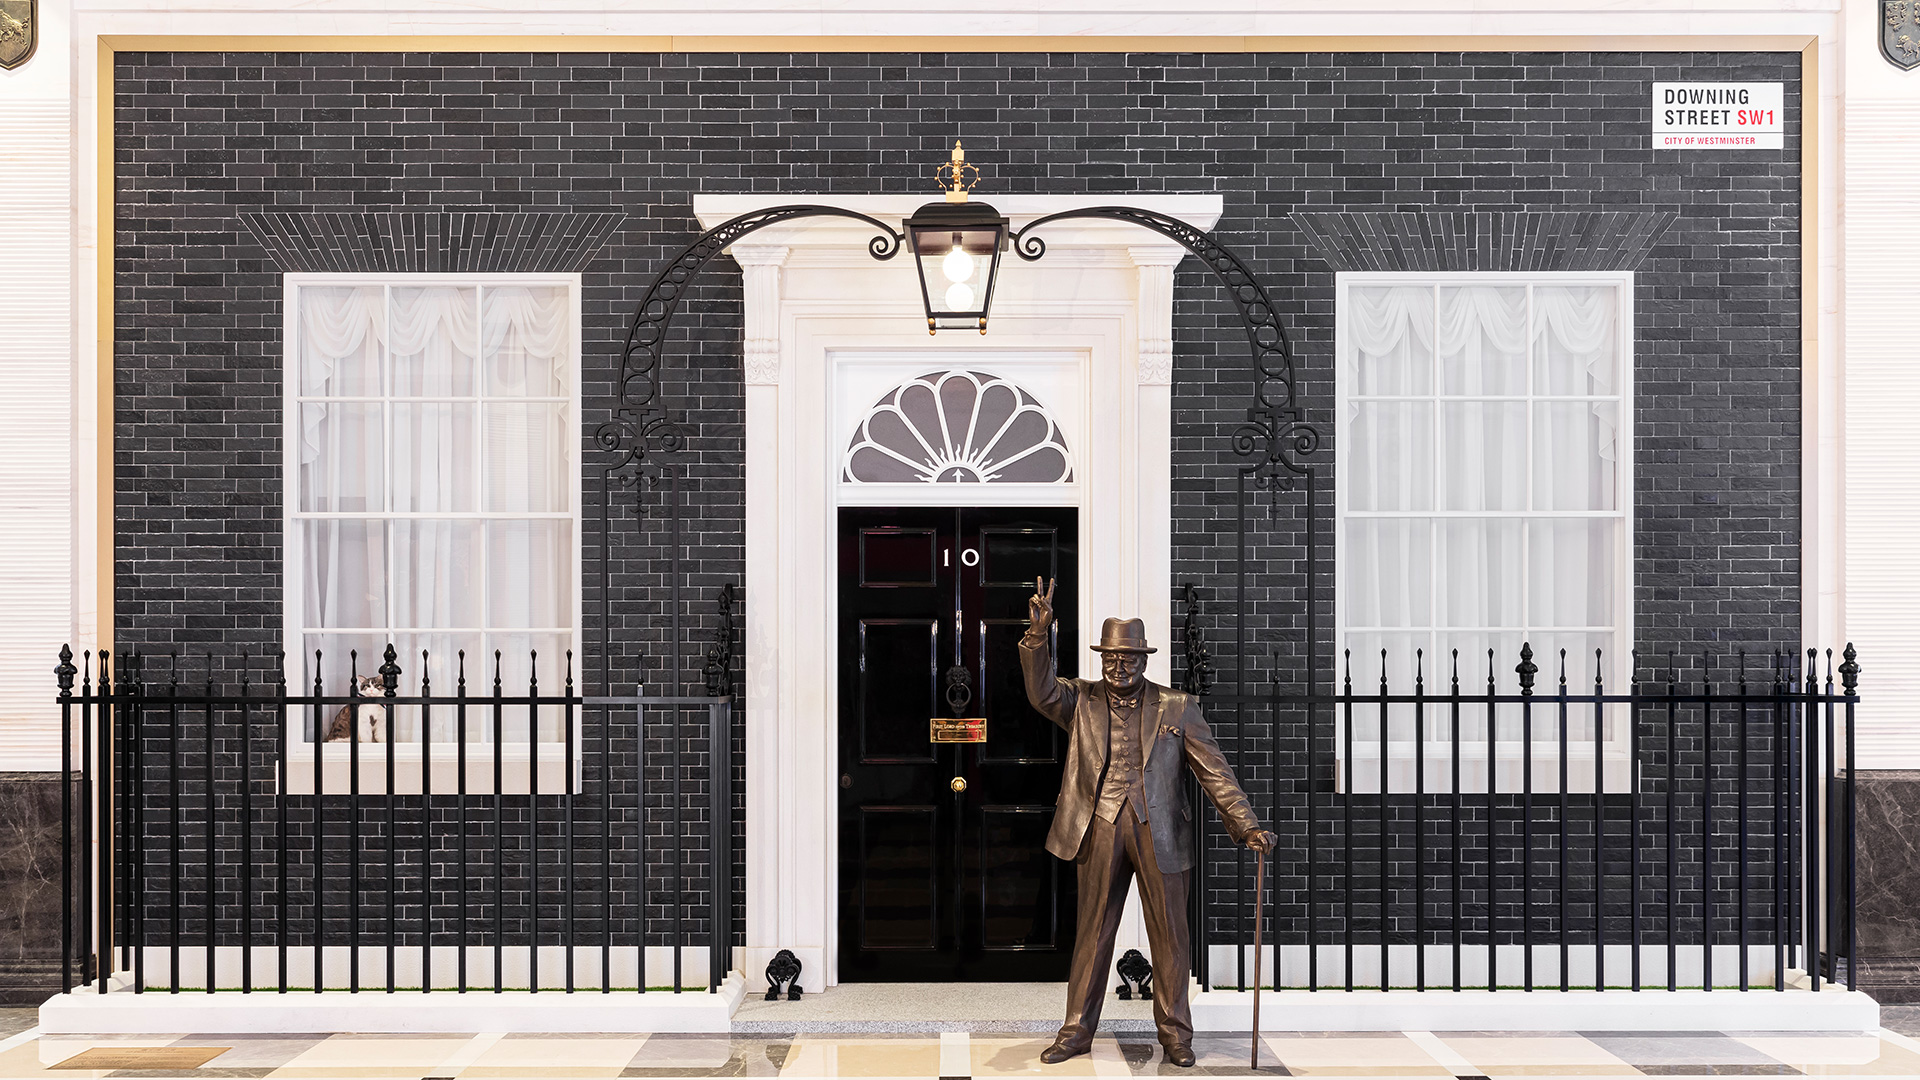 The Londoner Attractions -Downing Street